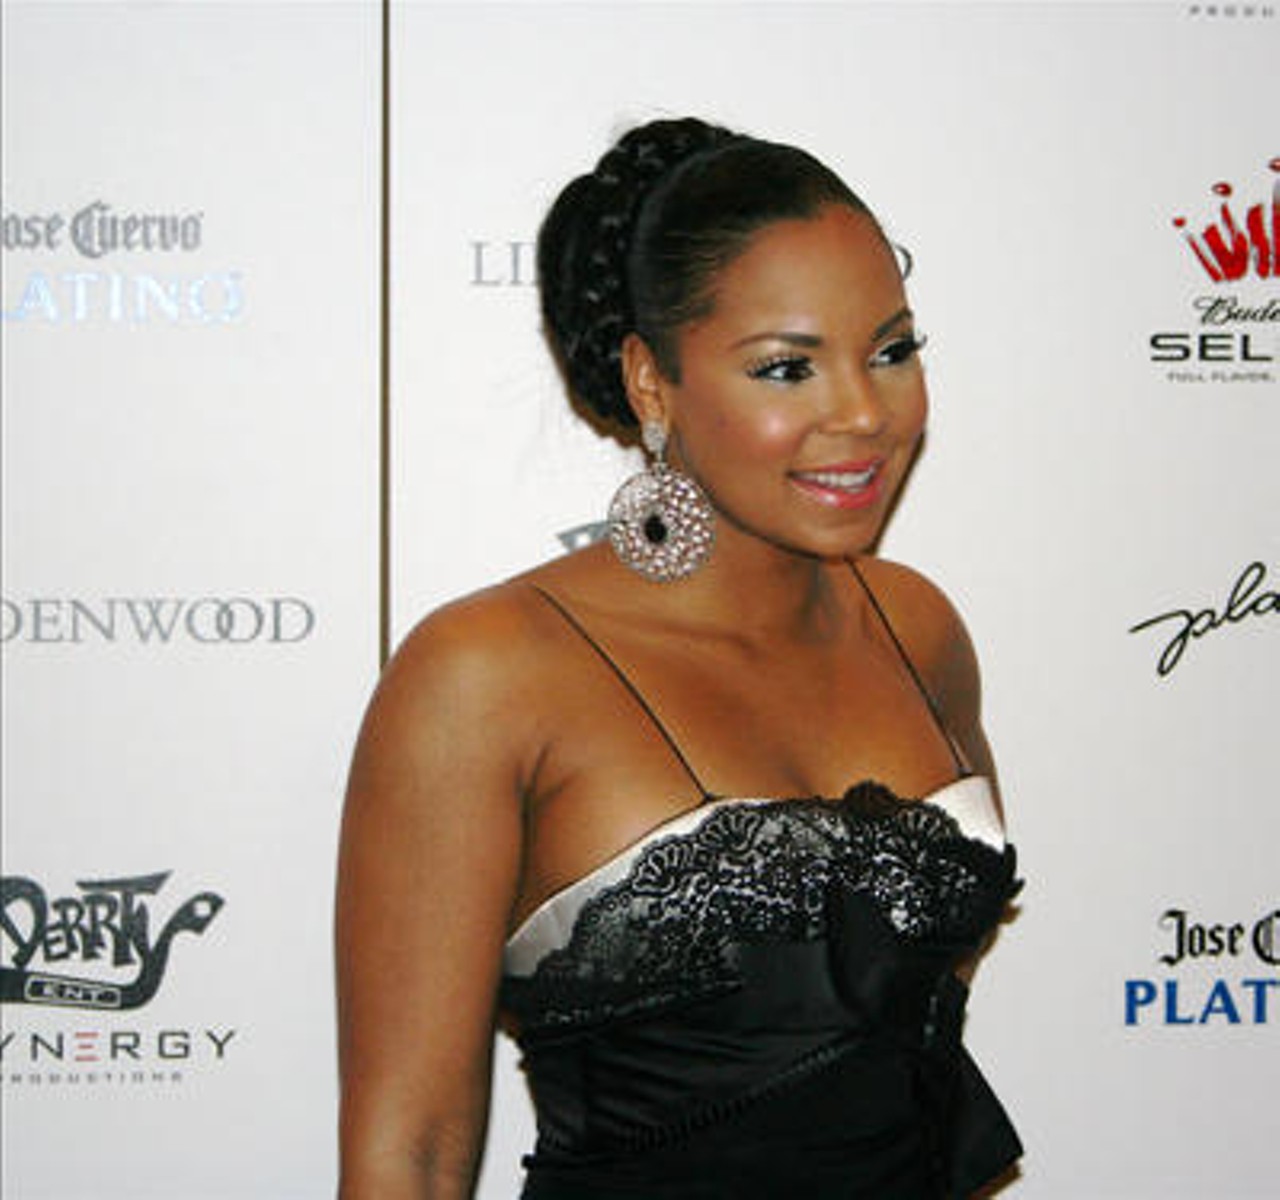 Ashanti at Nelly's Black and White Ball on November 30. More photos.